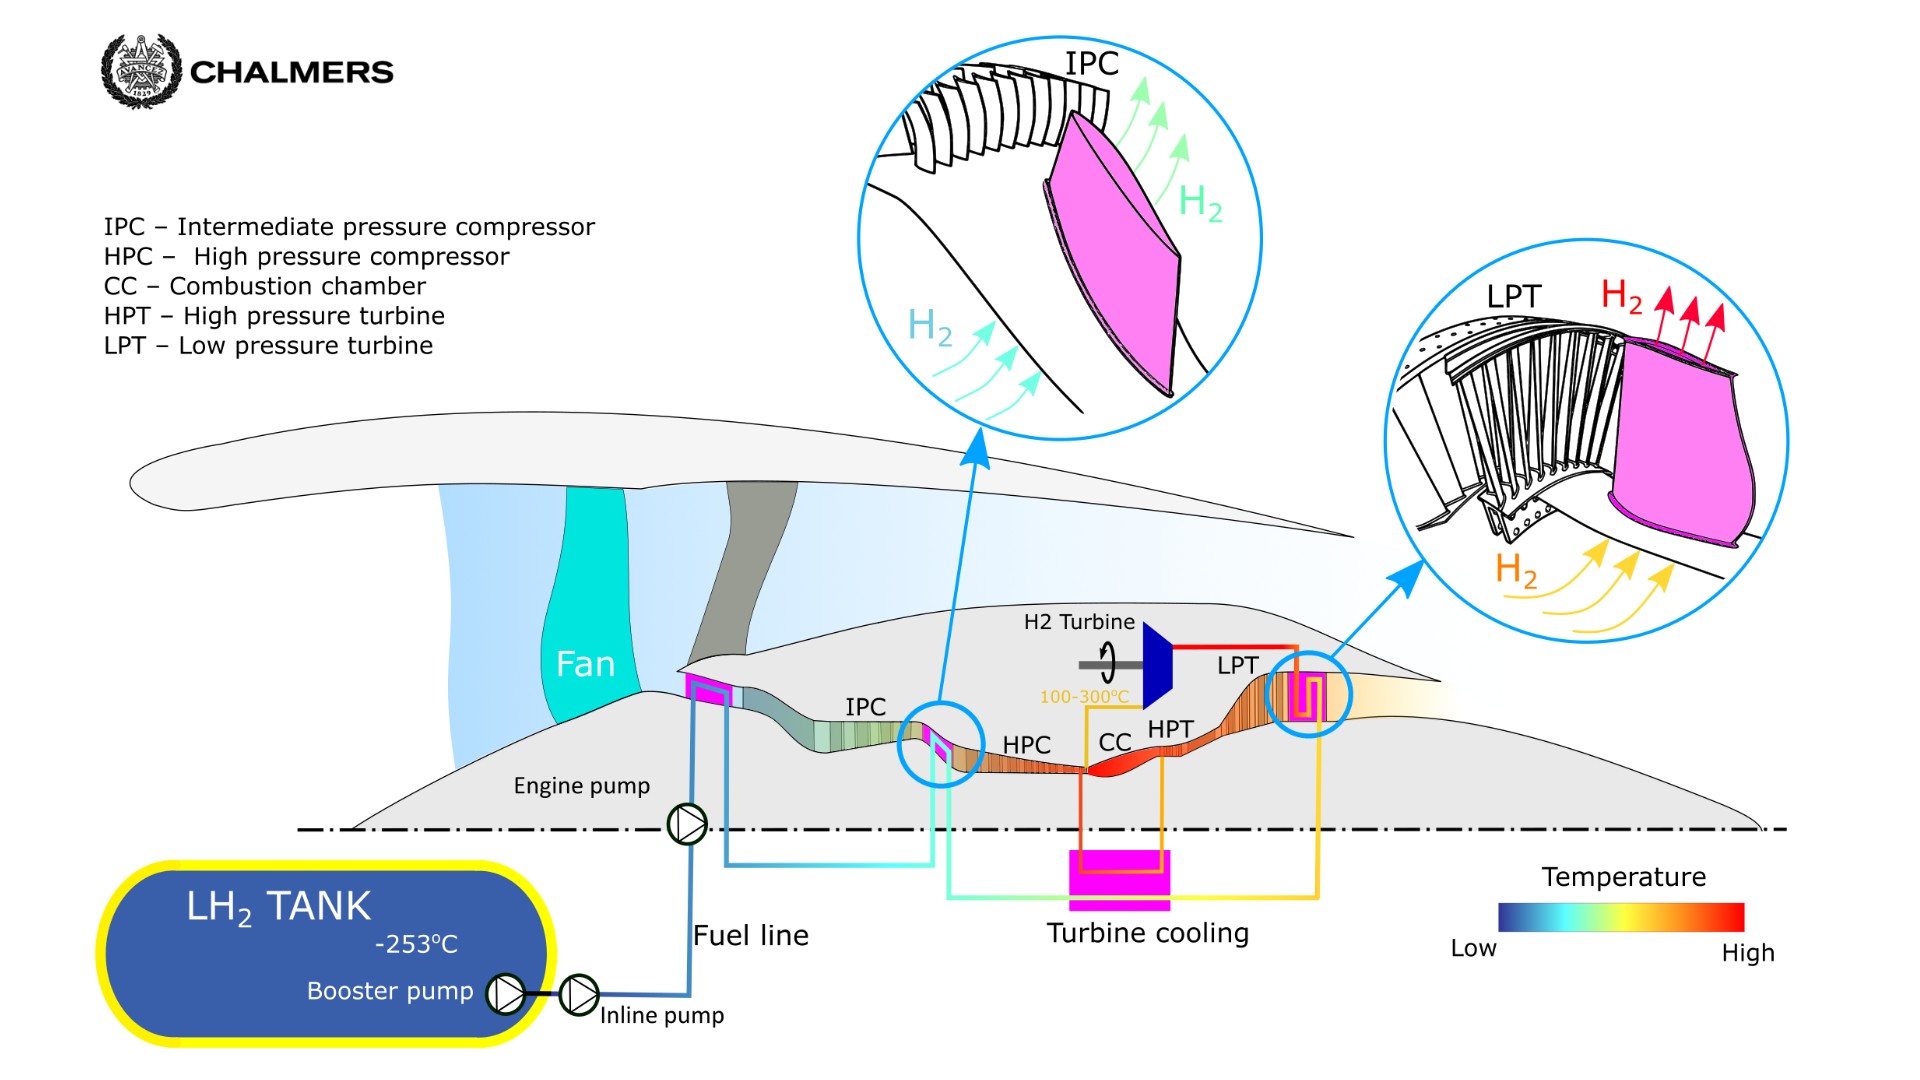 Potential locations in the gas turbine process where heat can be transferred to hydrogen.